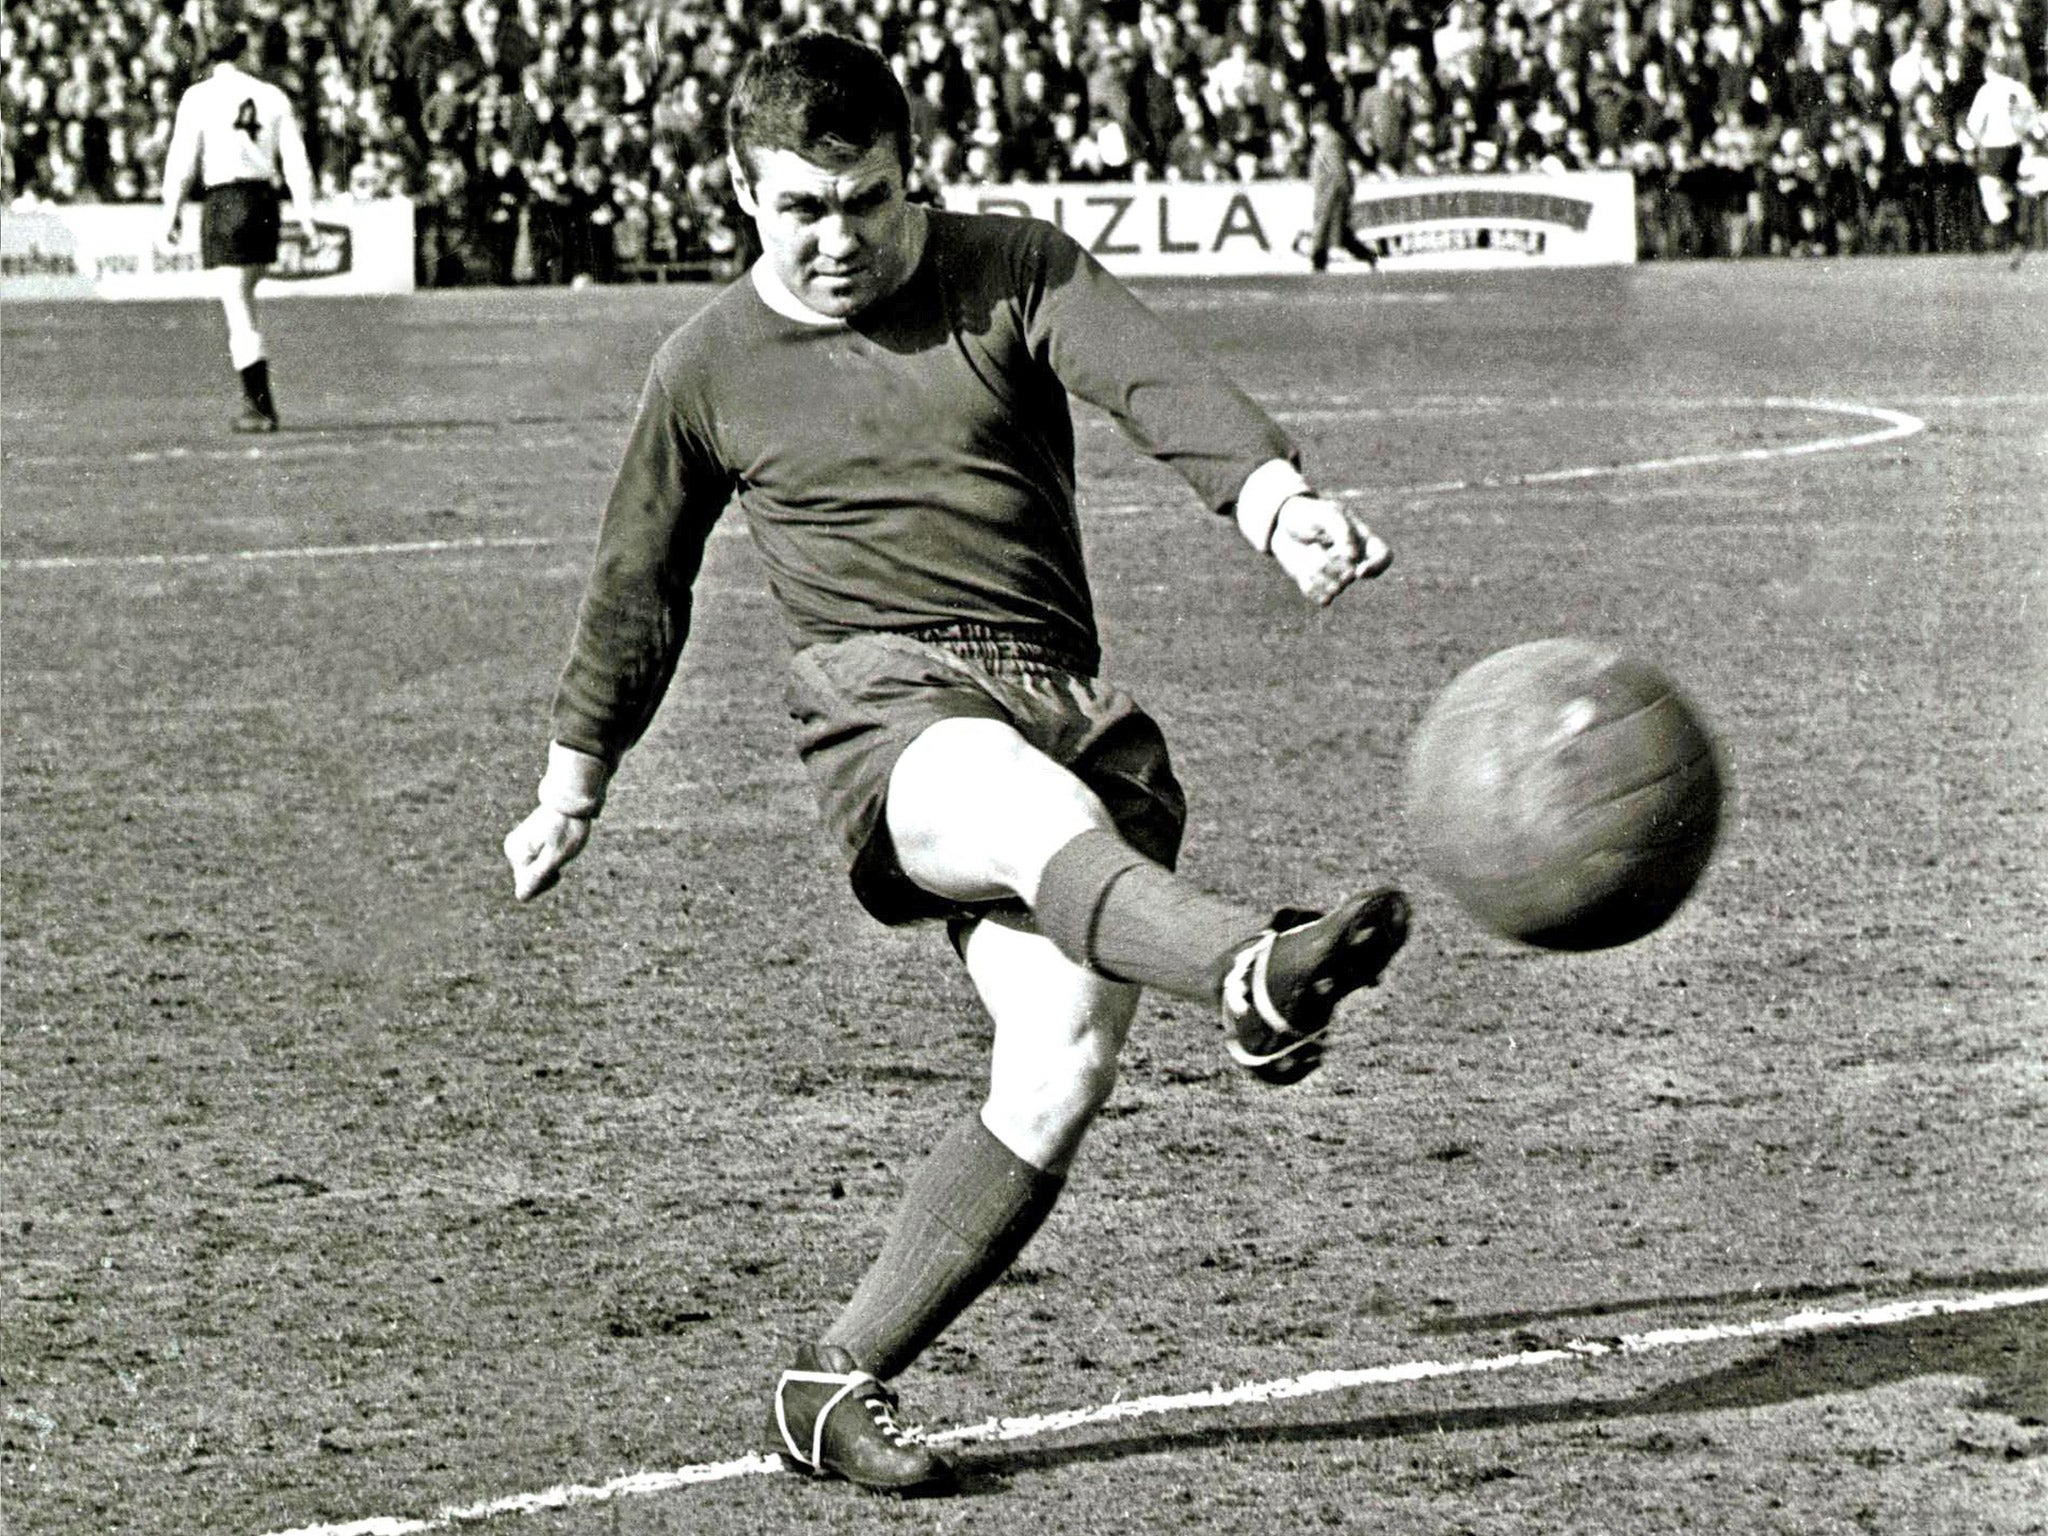 Pocket Napoleon: Collins in Leeds United’s change strip for a game at Fulham in 1965